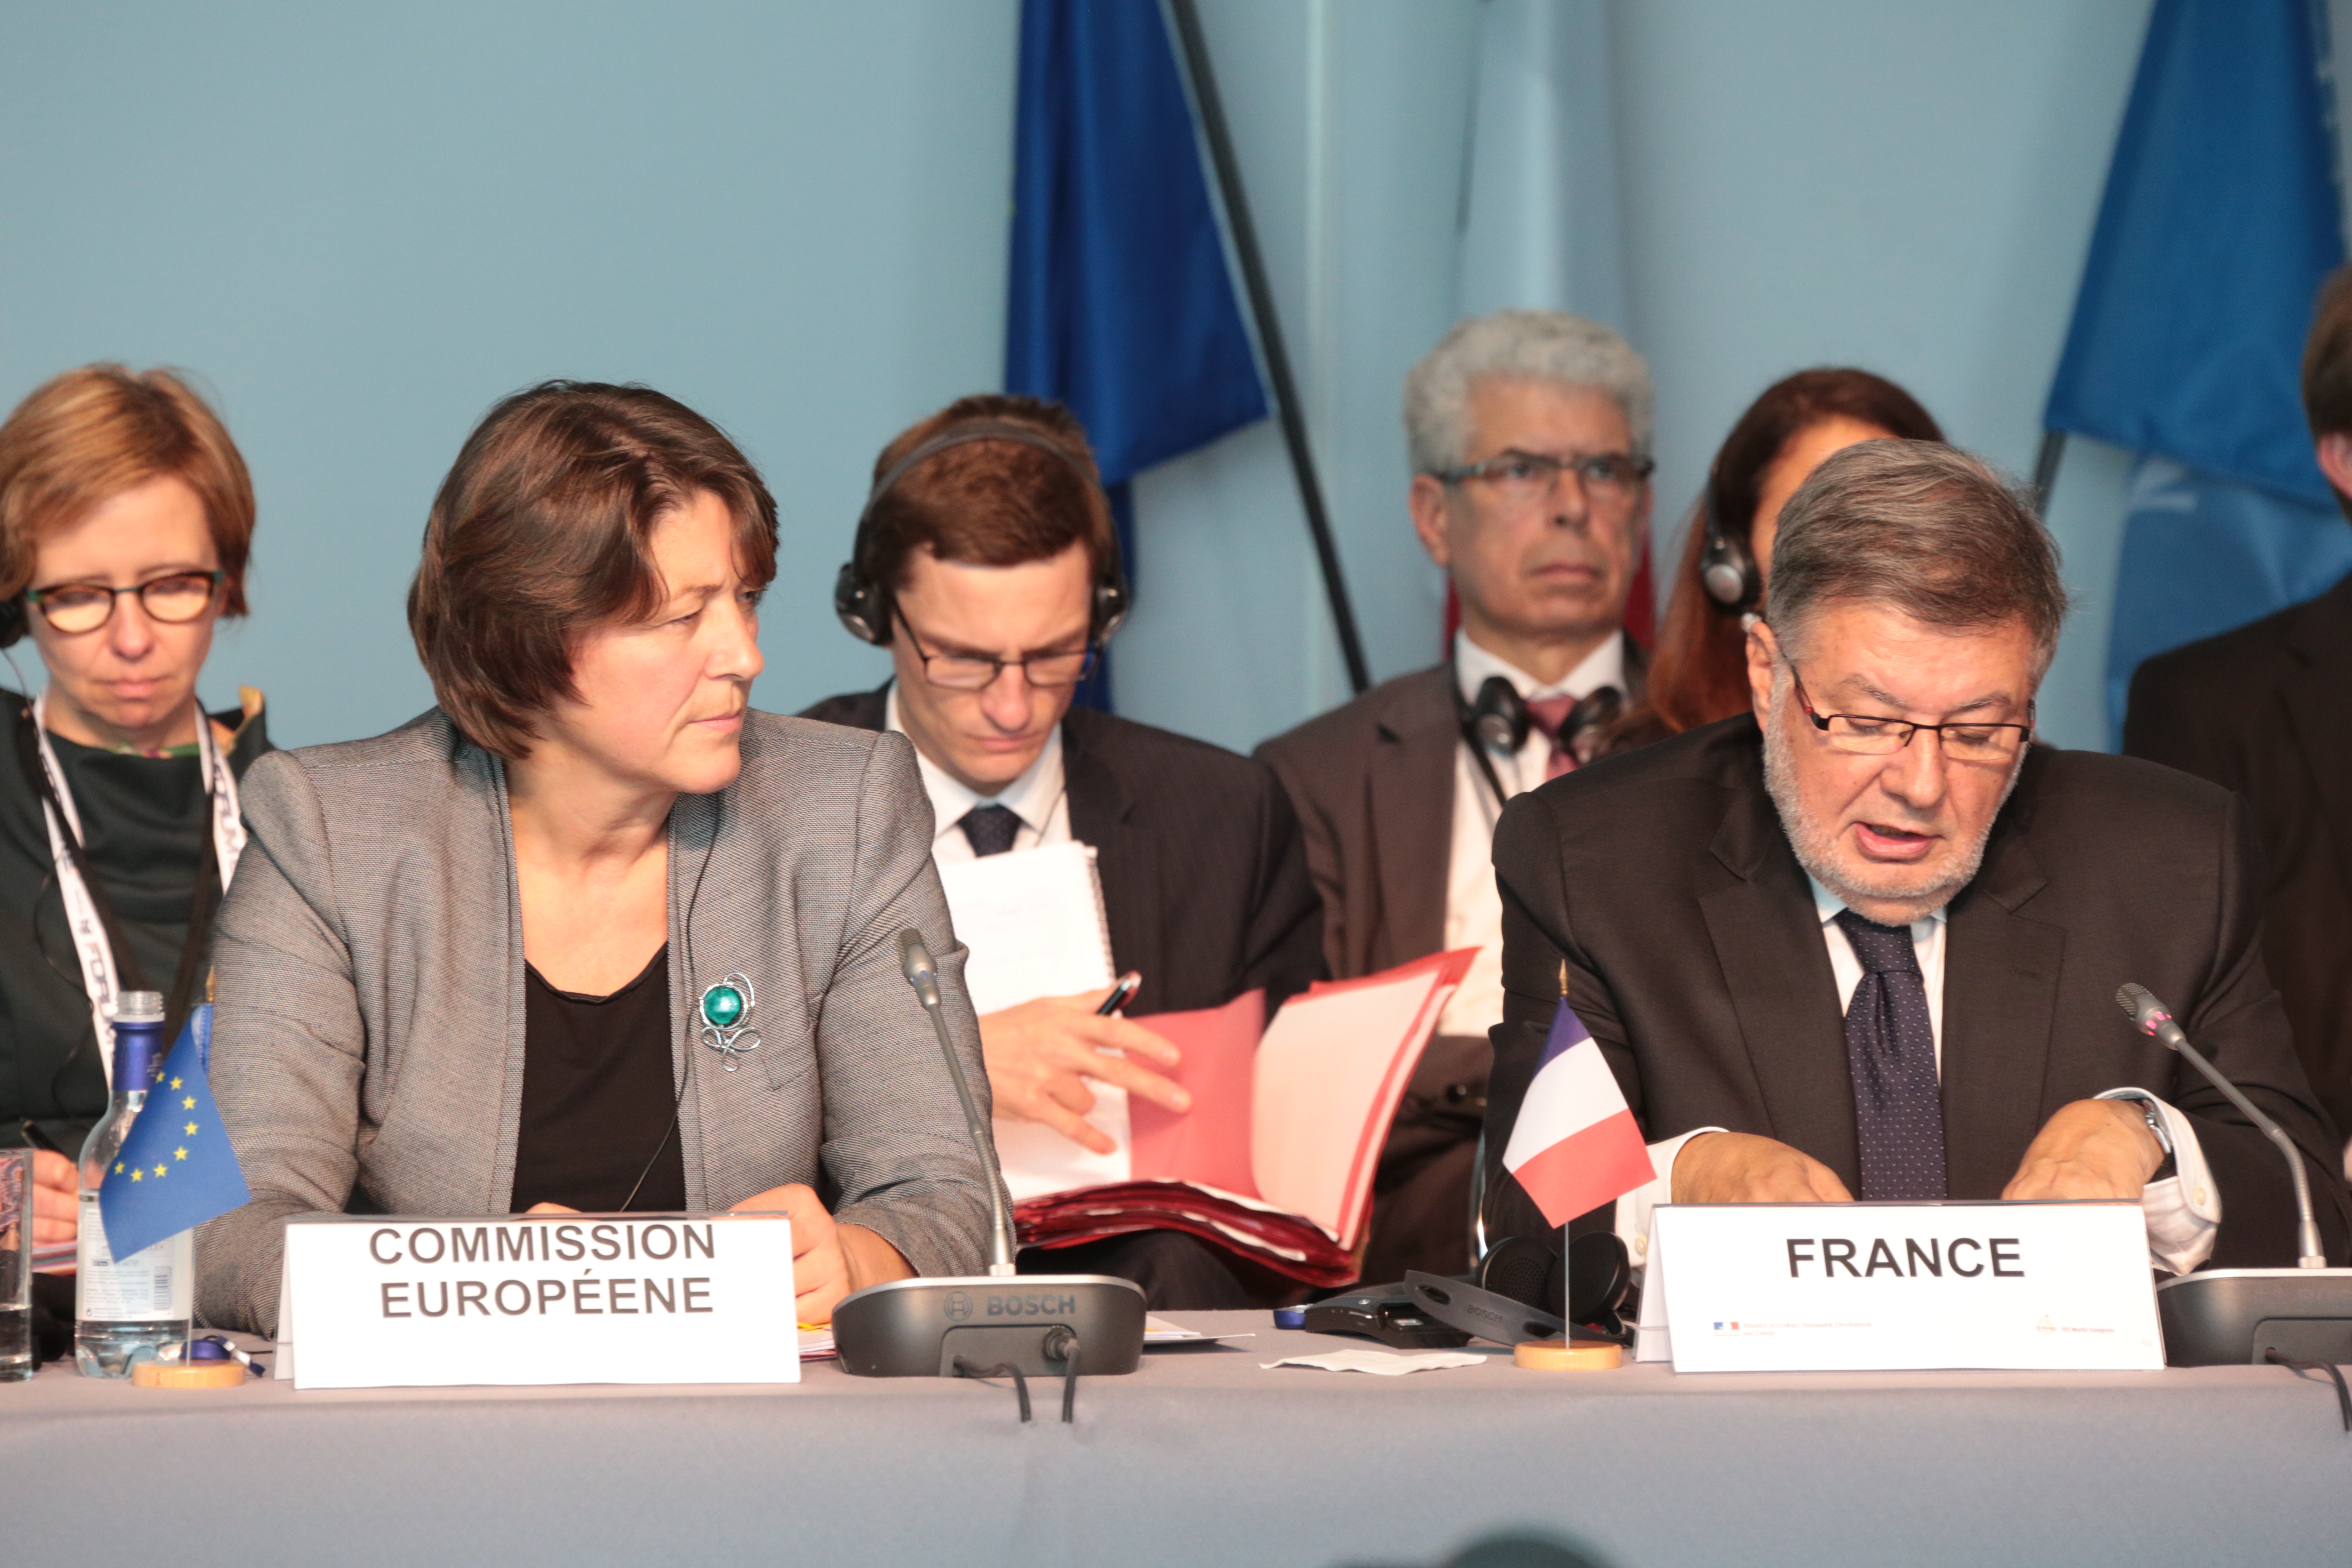 Download the report of the ministers’ roundtable held on 5 October in Bordeaux